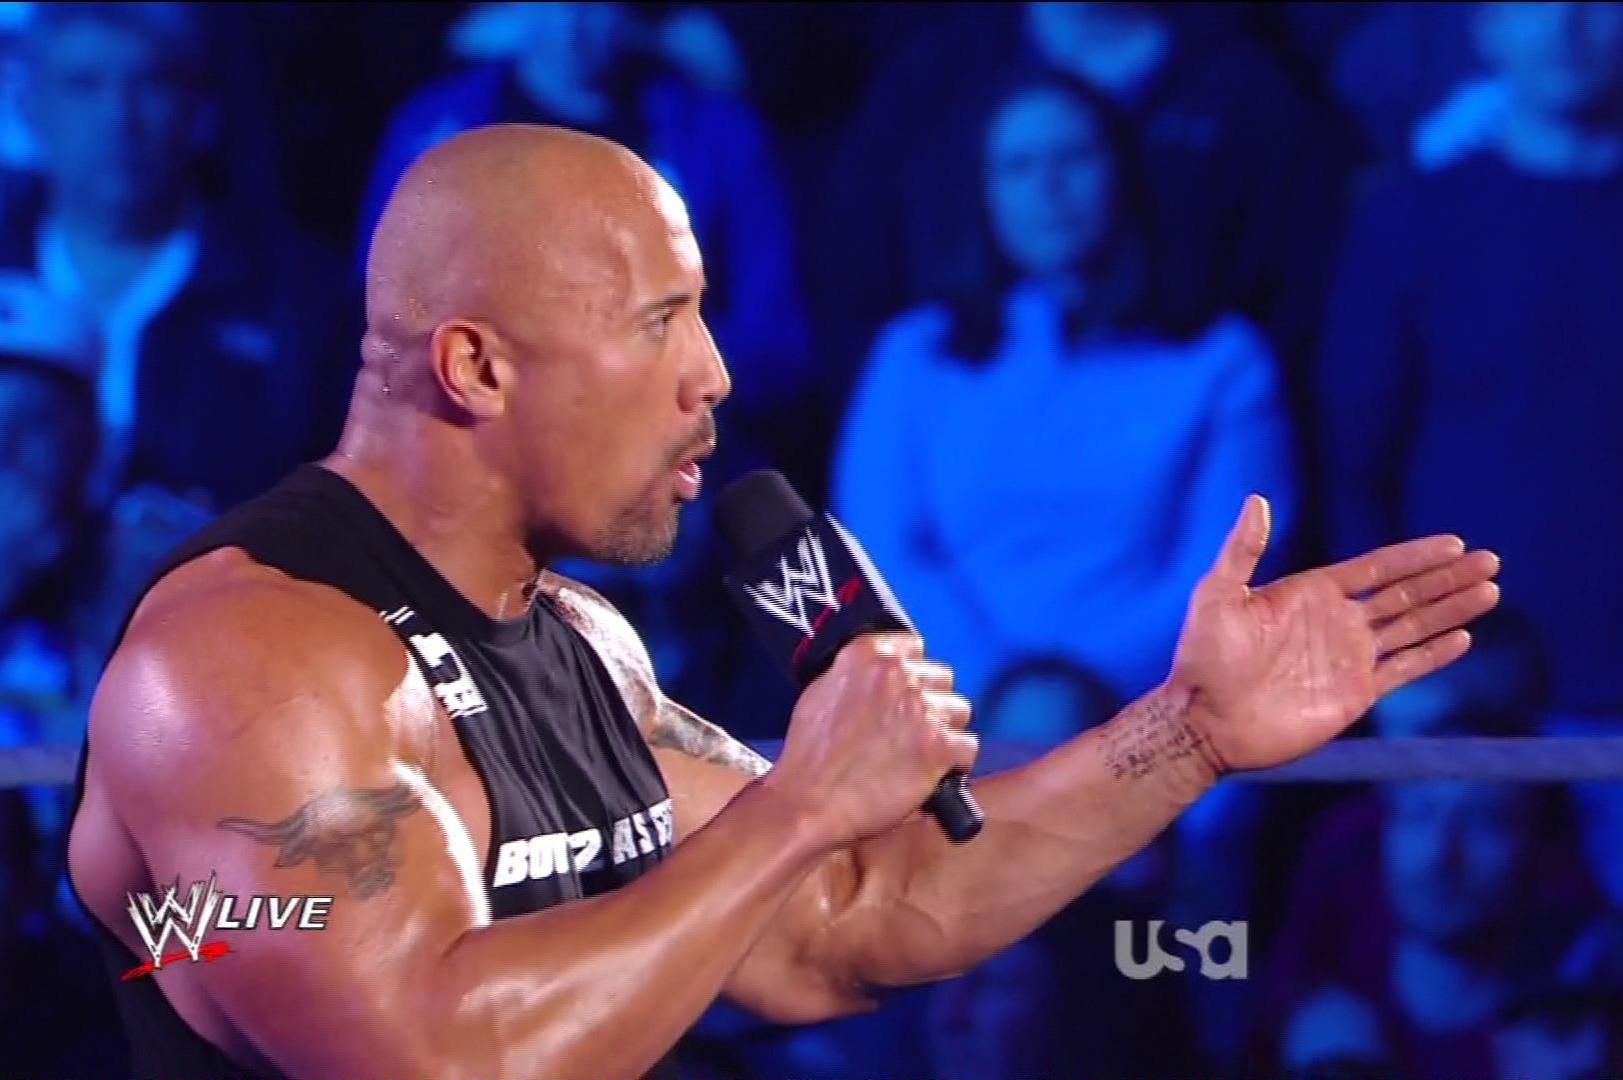 The Rock cuts a promo with notes on his wrist